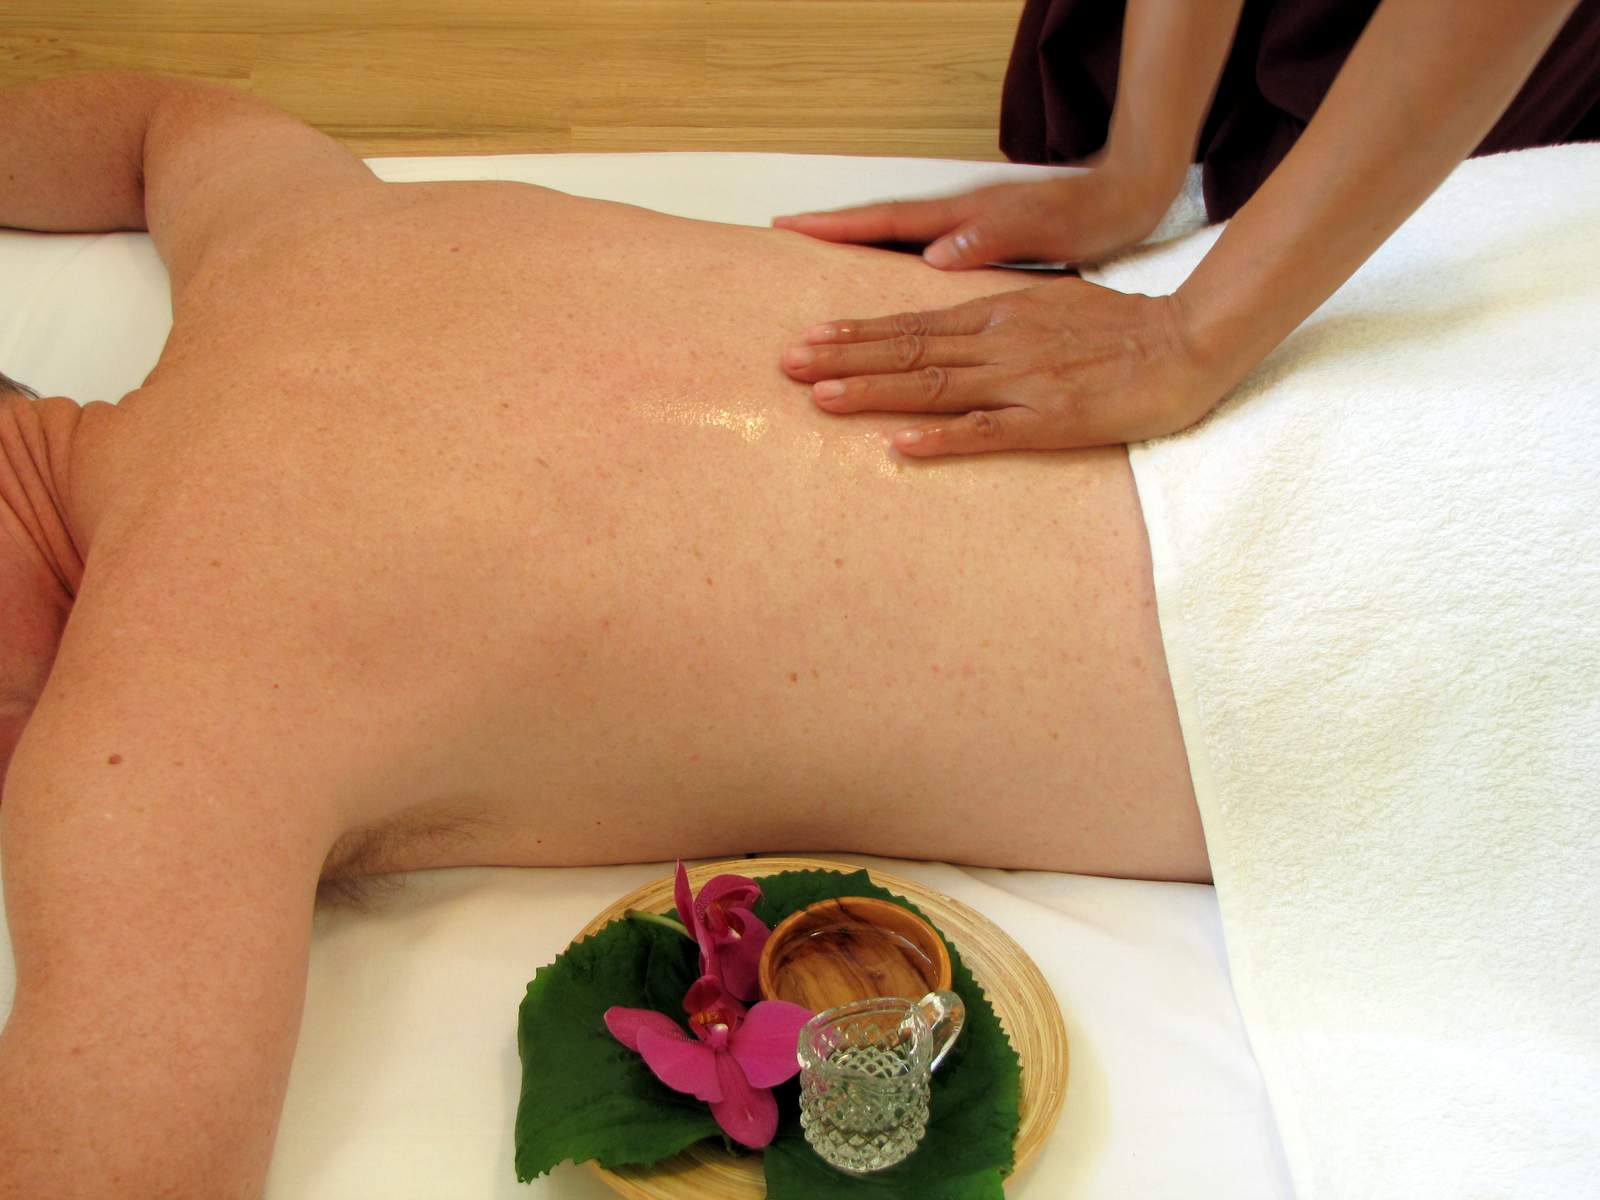 Aromatherapy or oil massage